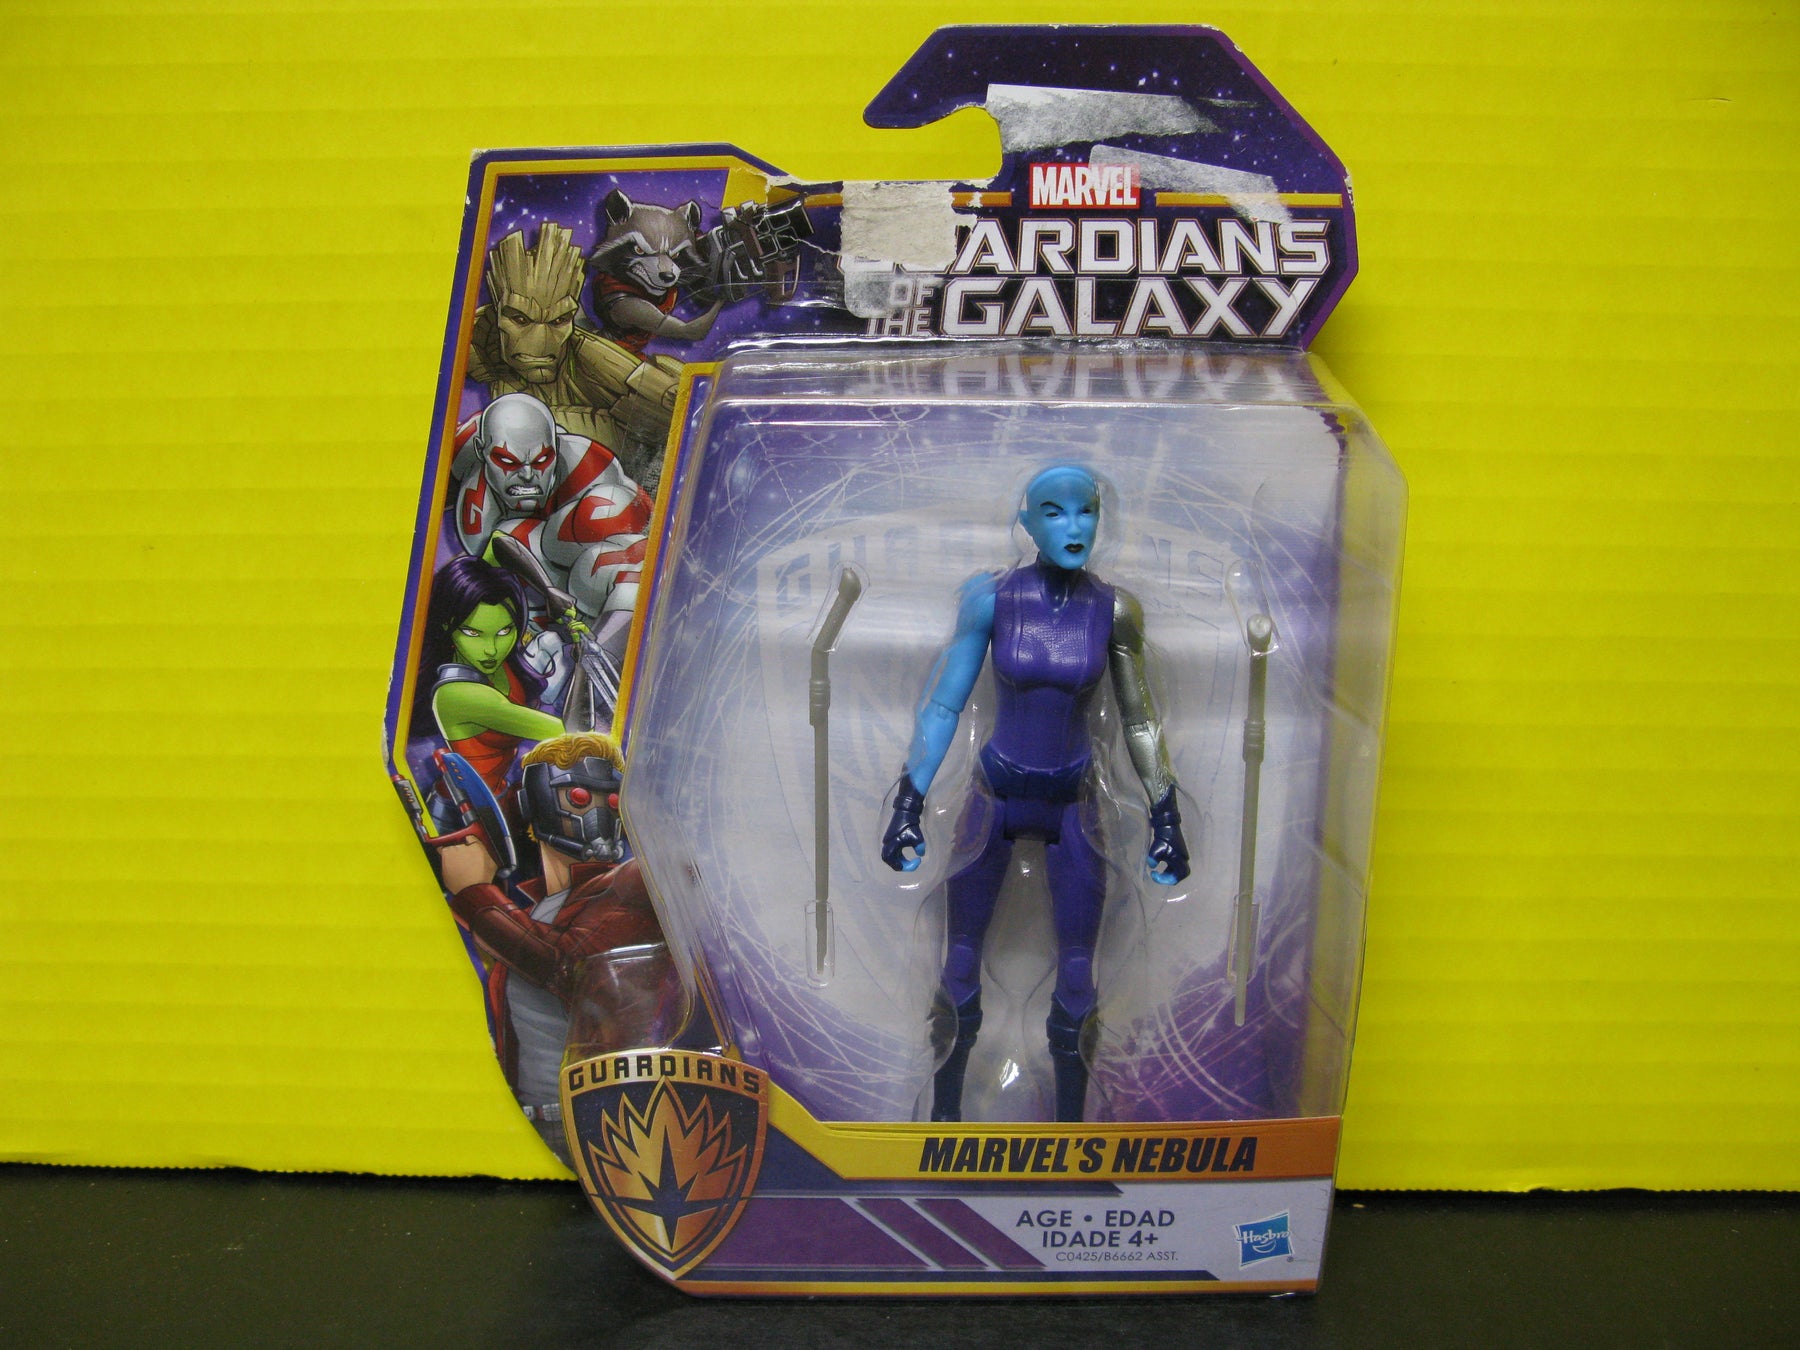 Guardians of the Galaxy Marvel's Nebula Action Figure